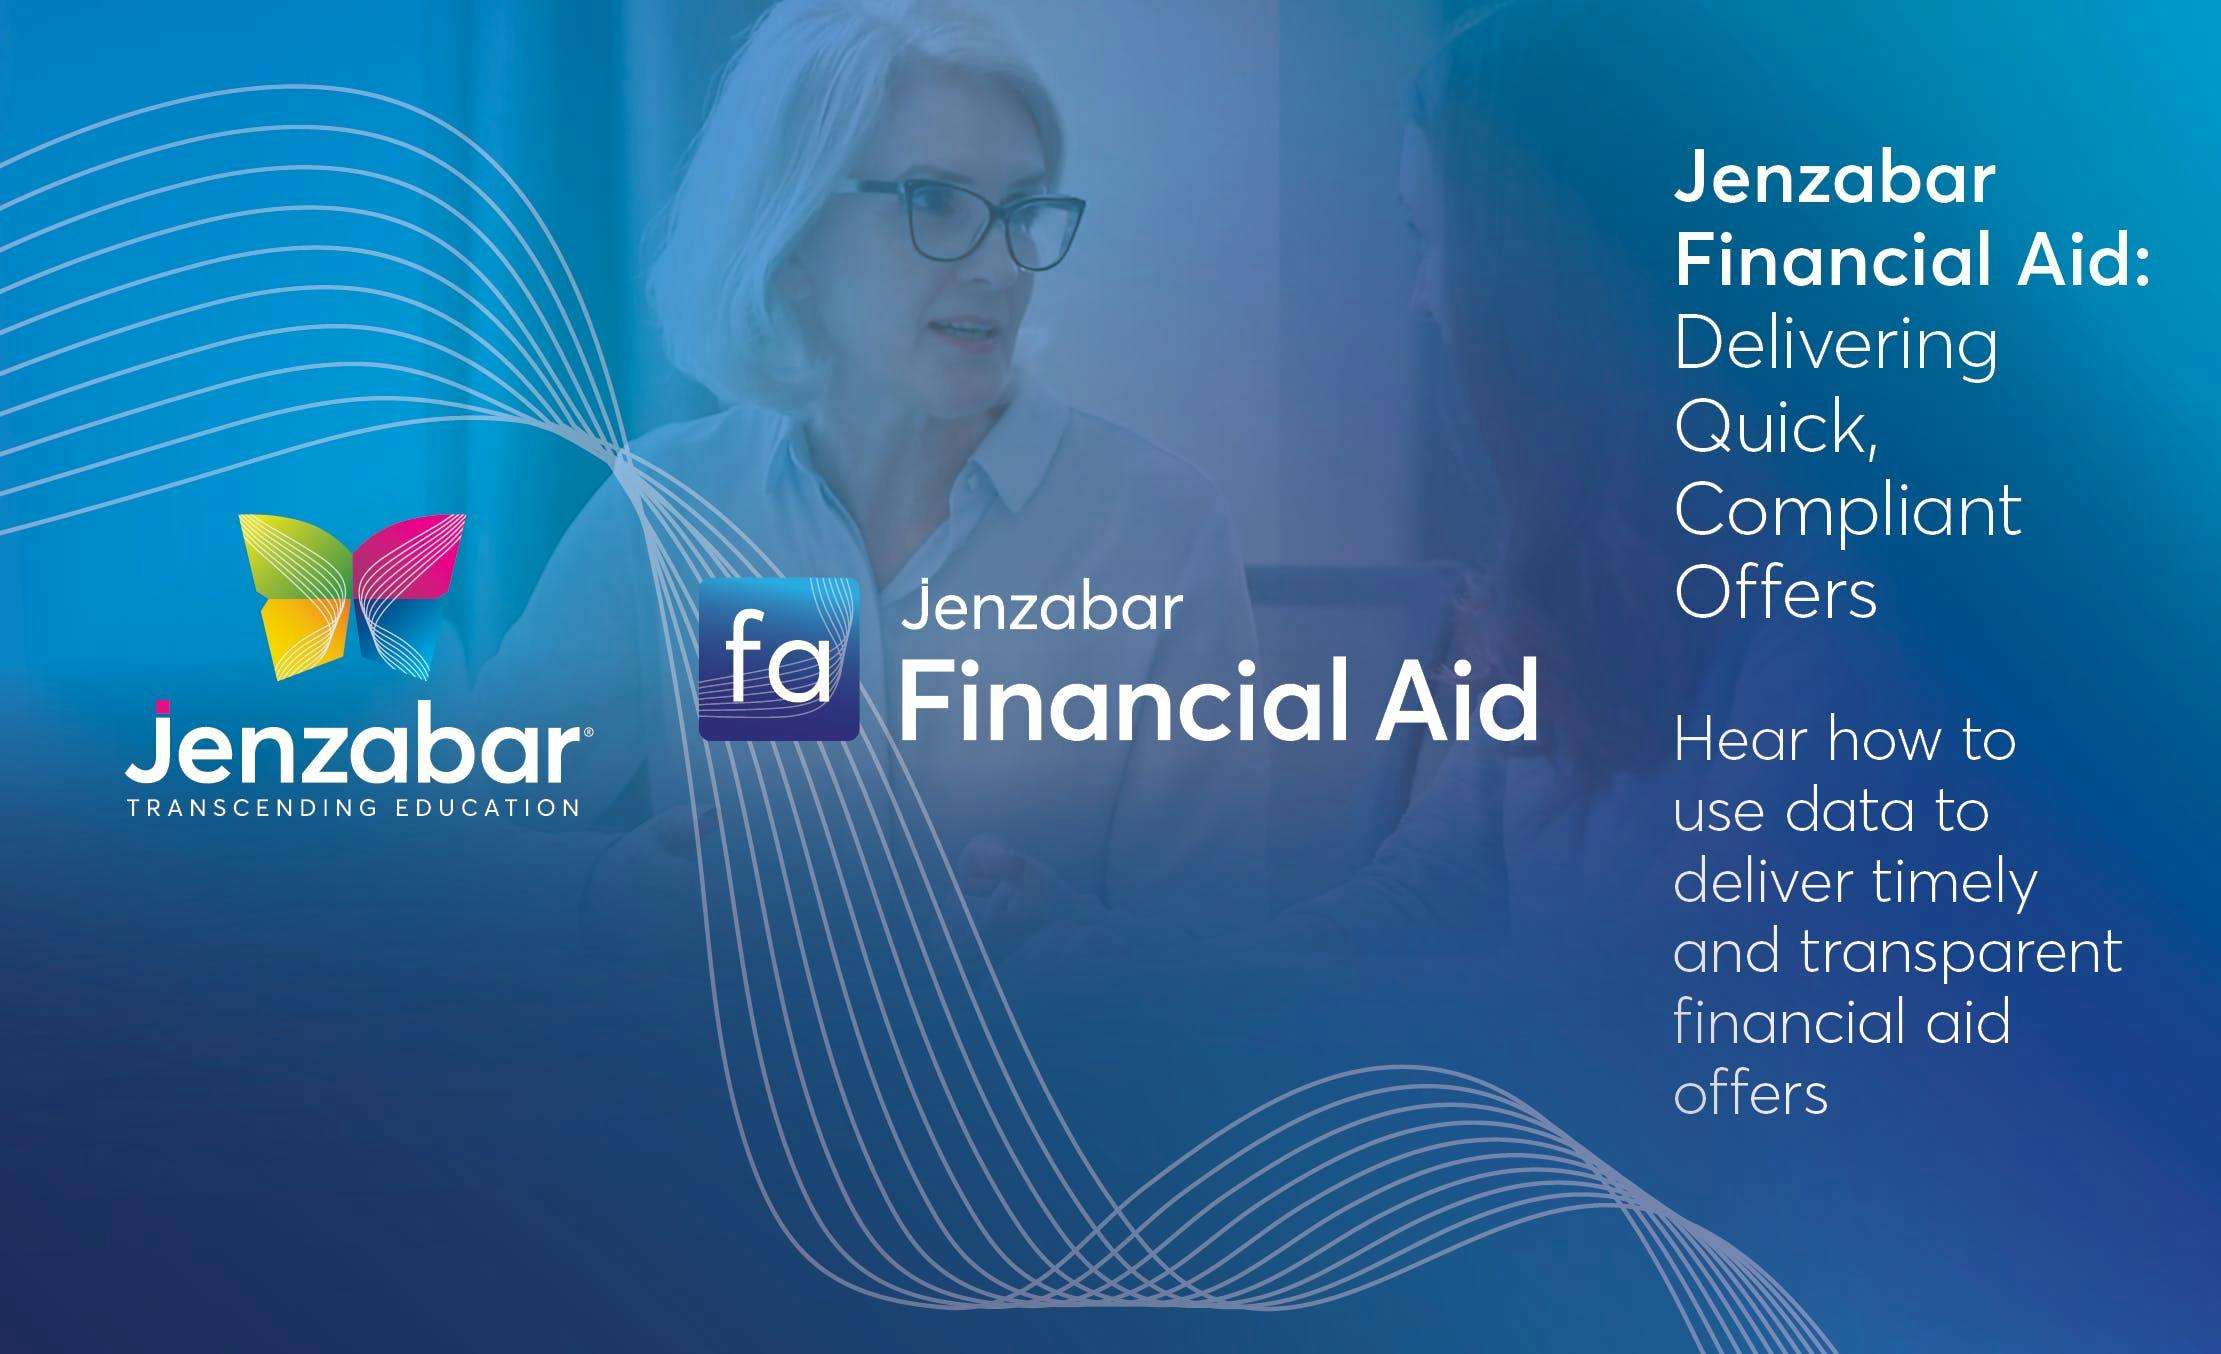 Video: Jenzabar Financial Aid: Delivering Quick, Compliant Offers